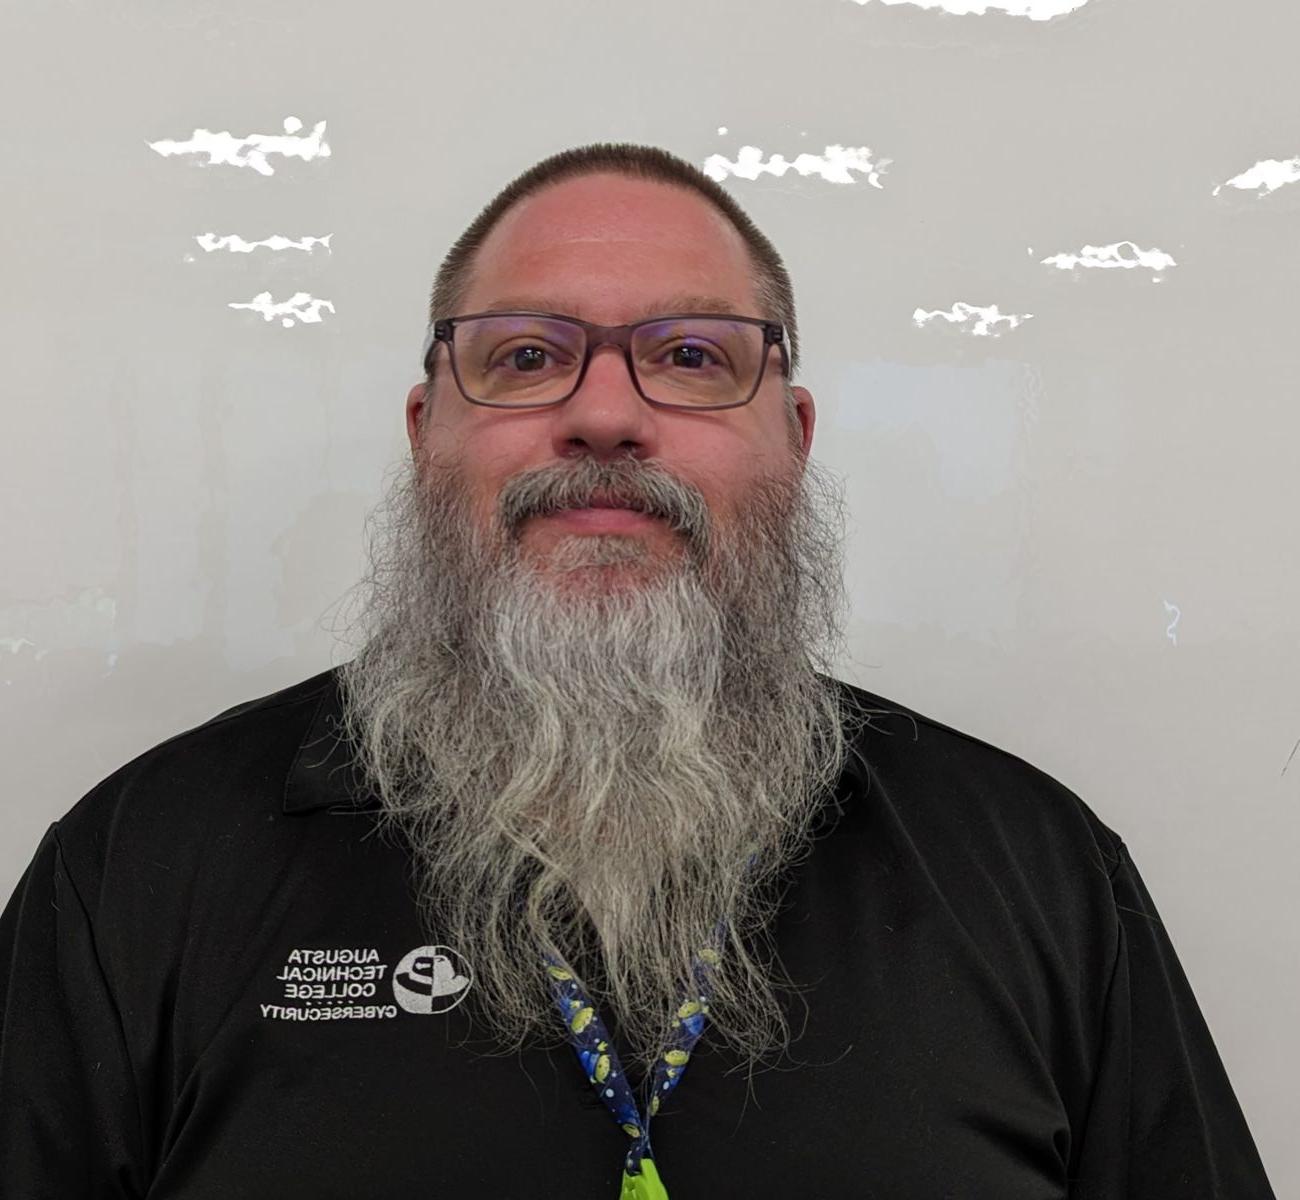 A Caucasian male with short brown hair and grey beard wearing a black Augusta Technical College Cybersecurity shirt. 